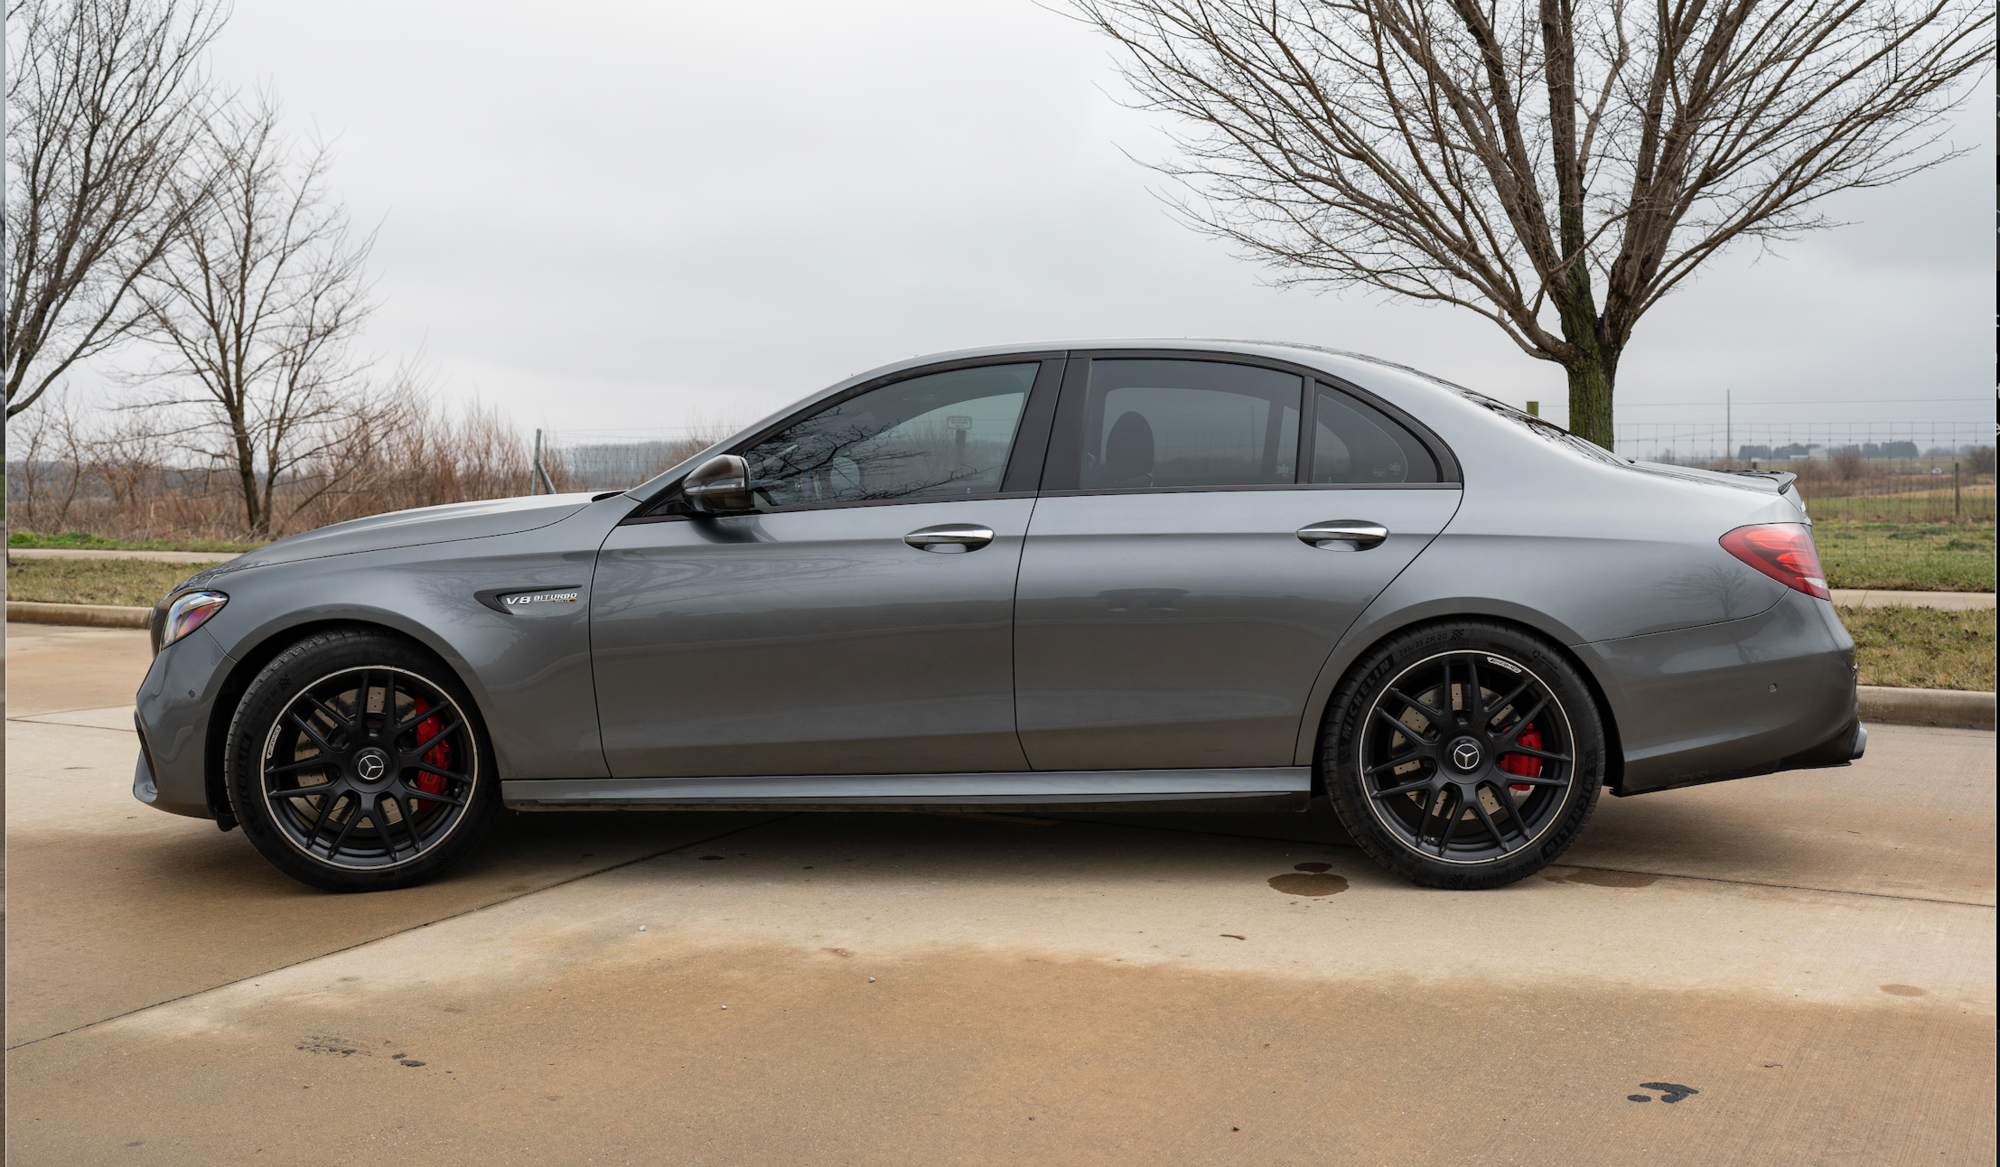 2020 Mercedes-Benz E63 AMG S - 2020 Mercedes-AMG E63S-High MSRP + Akrapovic and RENNtech Exhaust - Used - Rantoul, IL 61866, United States